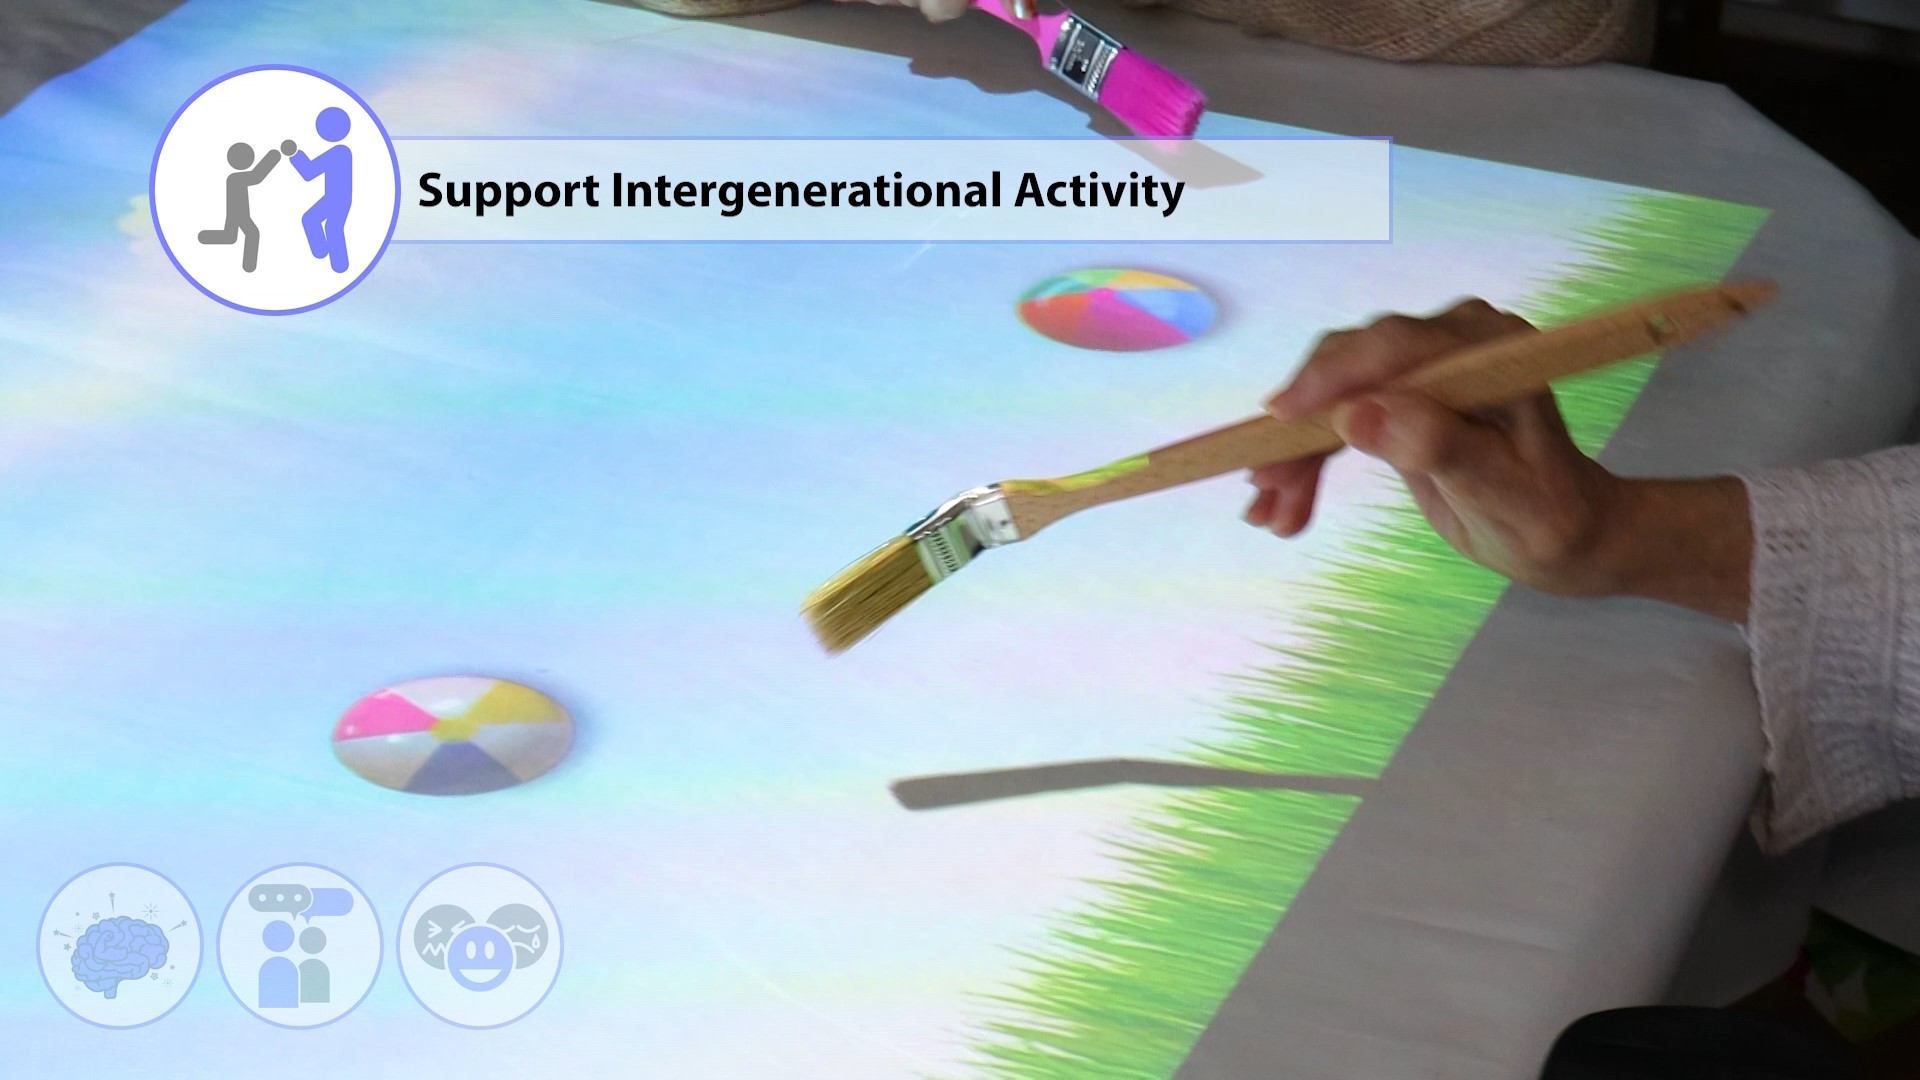 Care home residents taking part in a group activity and creating intergeneration connections by bouncing the balls using the Wellbeing suite interactive projector on a table with the included long reach paintbrush accessory